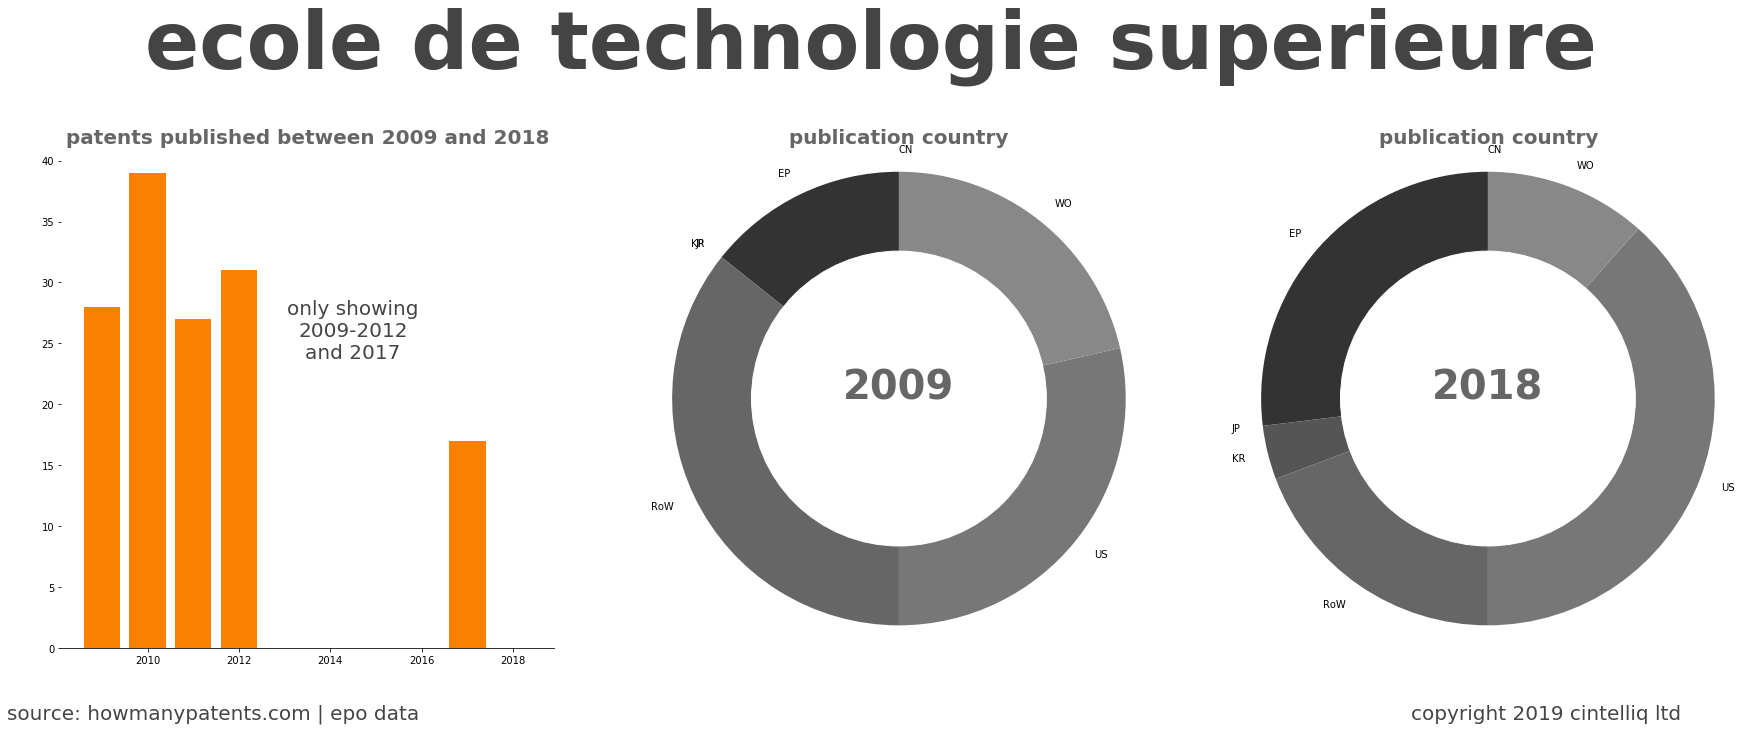 summary of patents for Ecole De Technologie Superieure